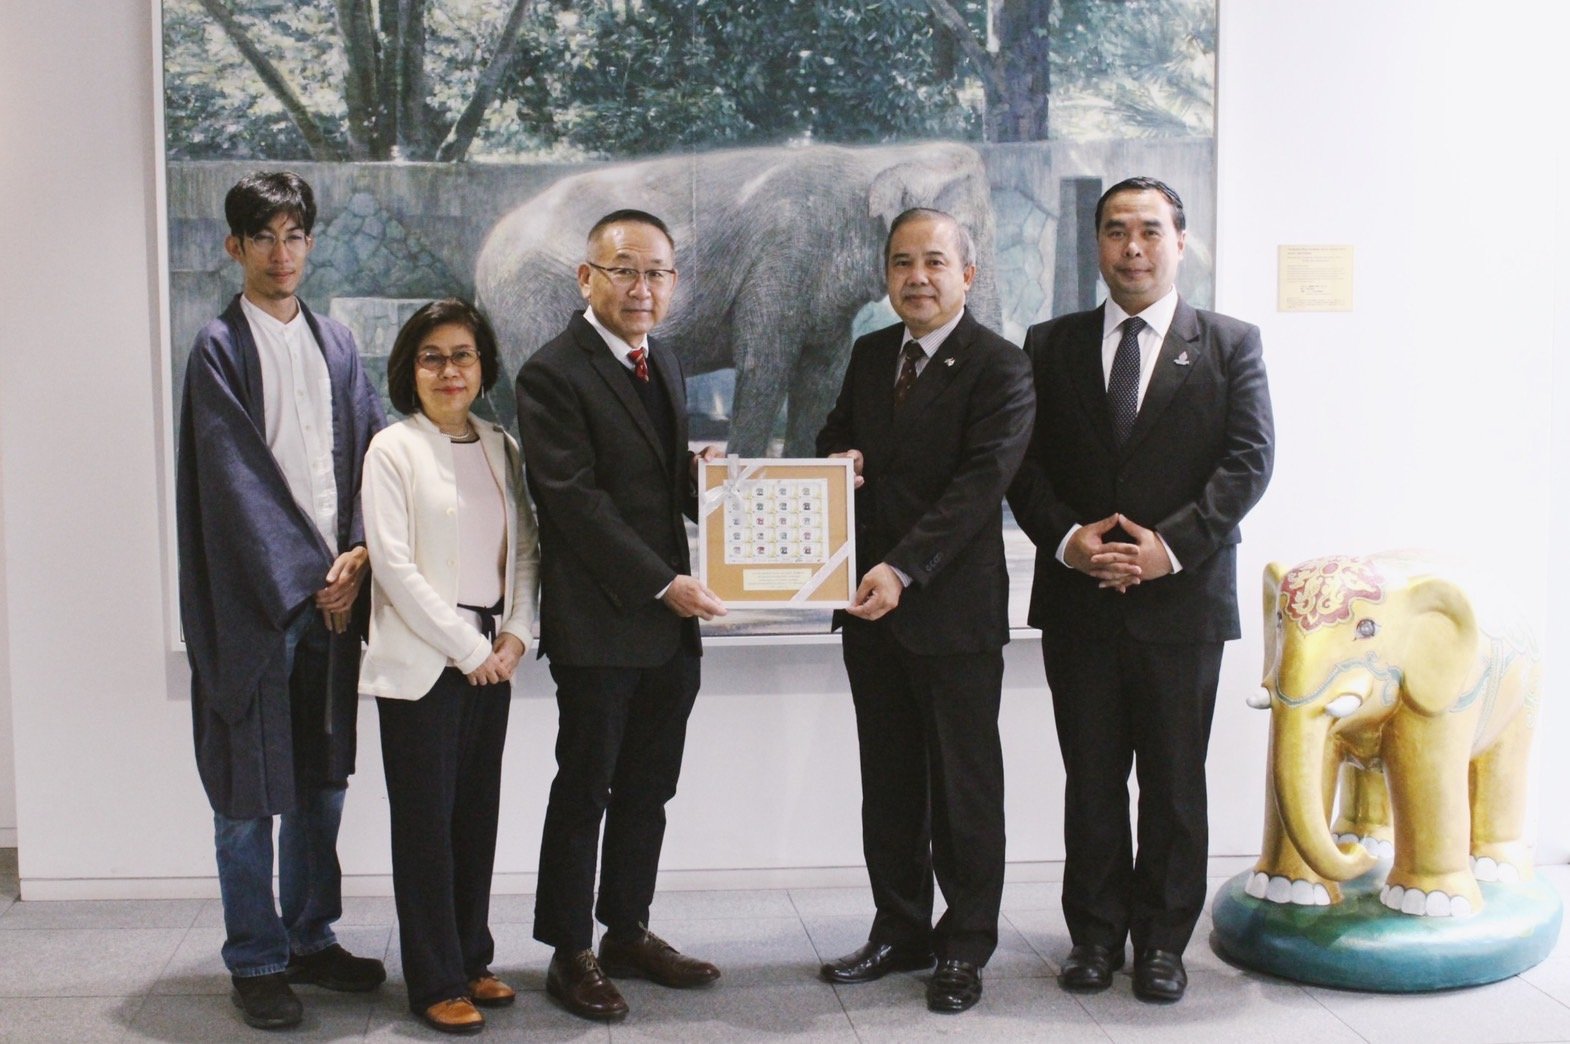 Deliver “Chiang Rai Art Elephant” to the Thai Embassy in Tokyo, Japan